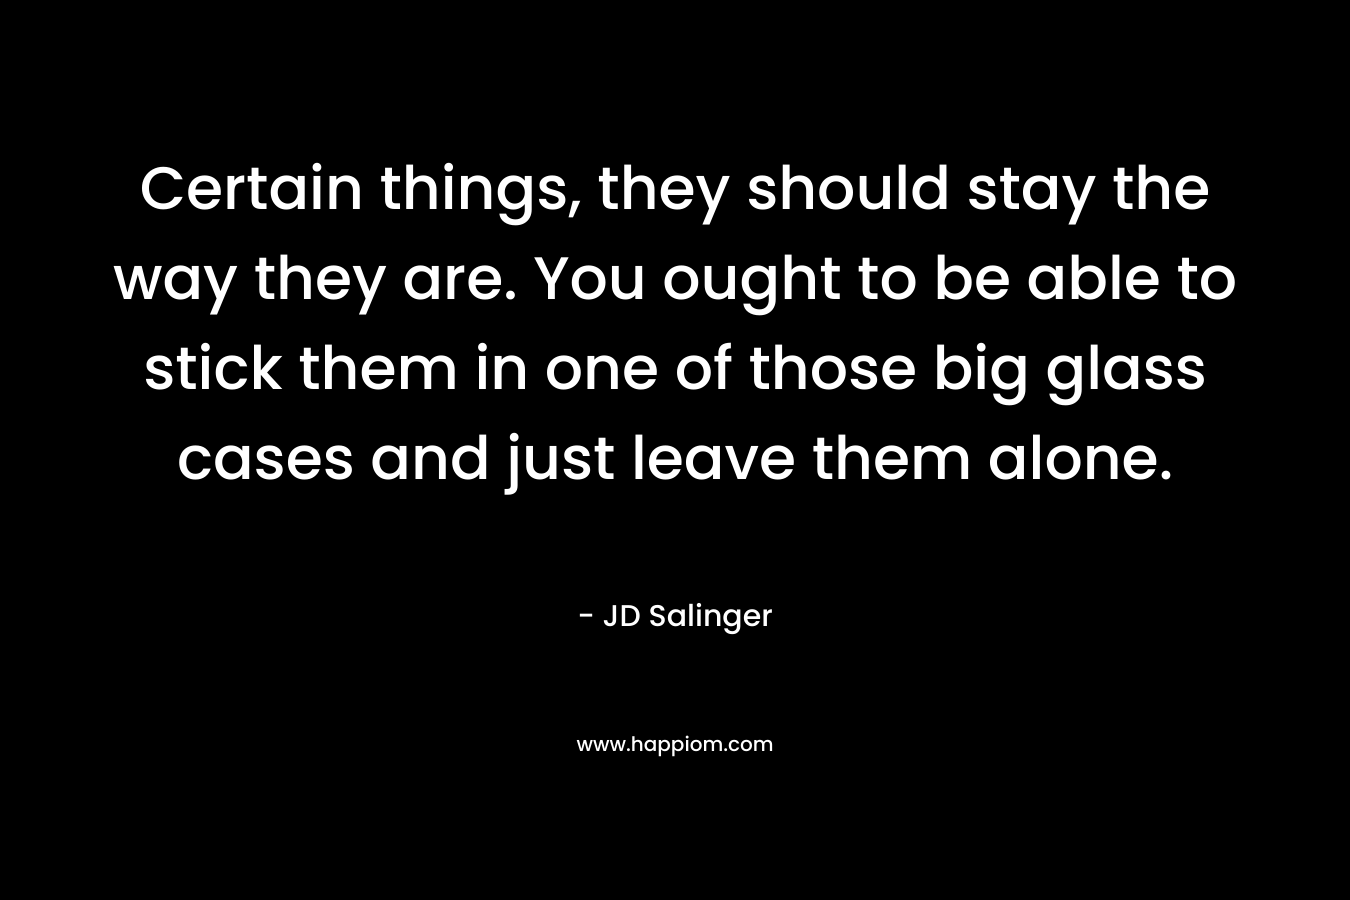 Certain things, they should stay the way they are. You ought to be able to stick them in one of those big glass cases and just leave them alone. – JD Salinger